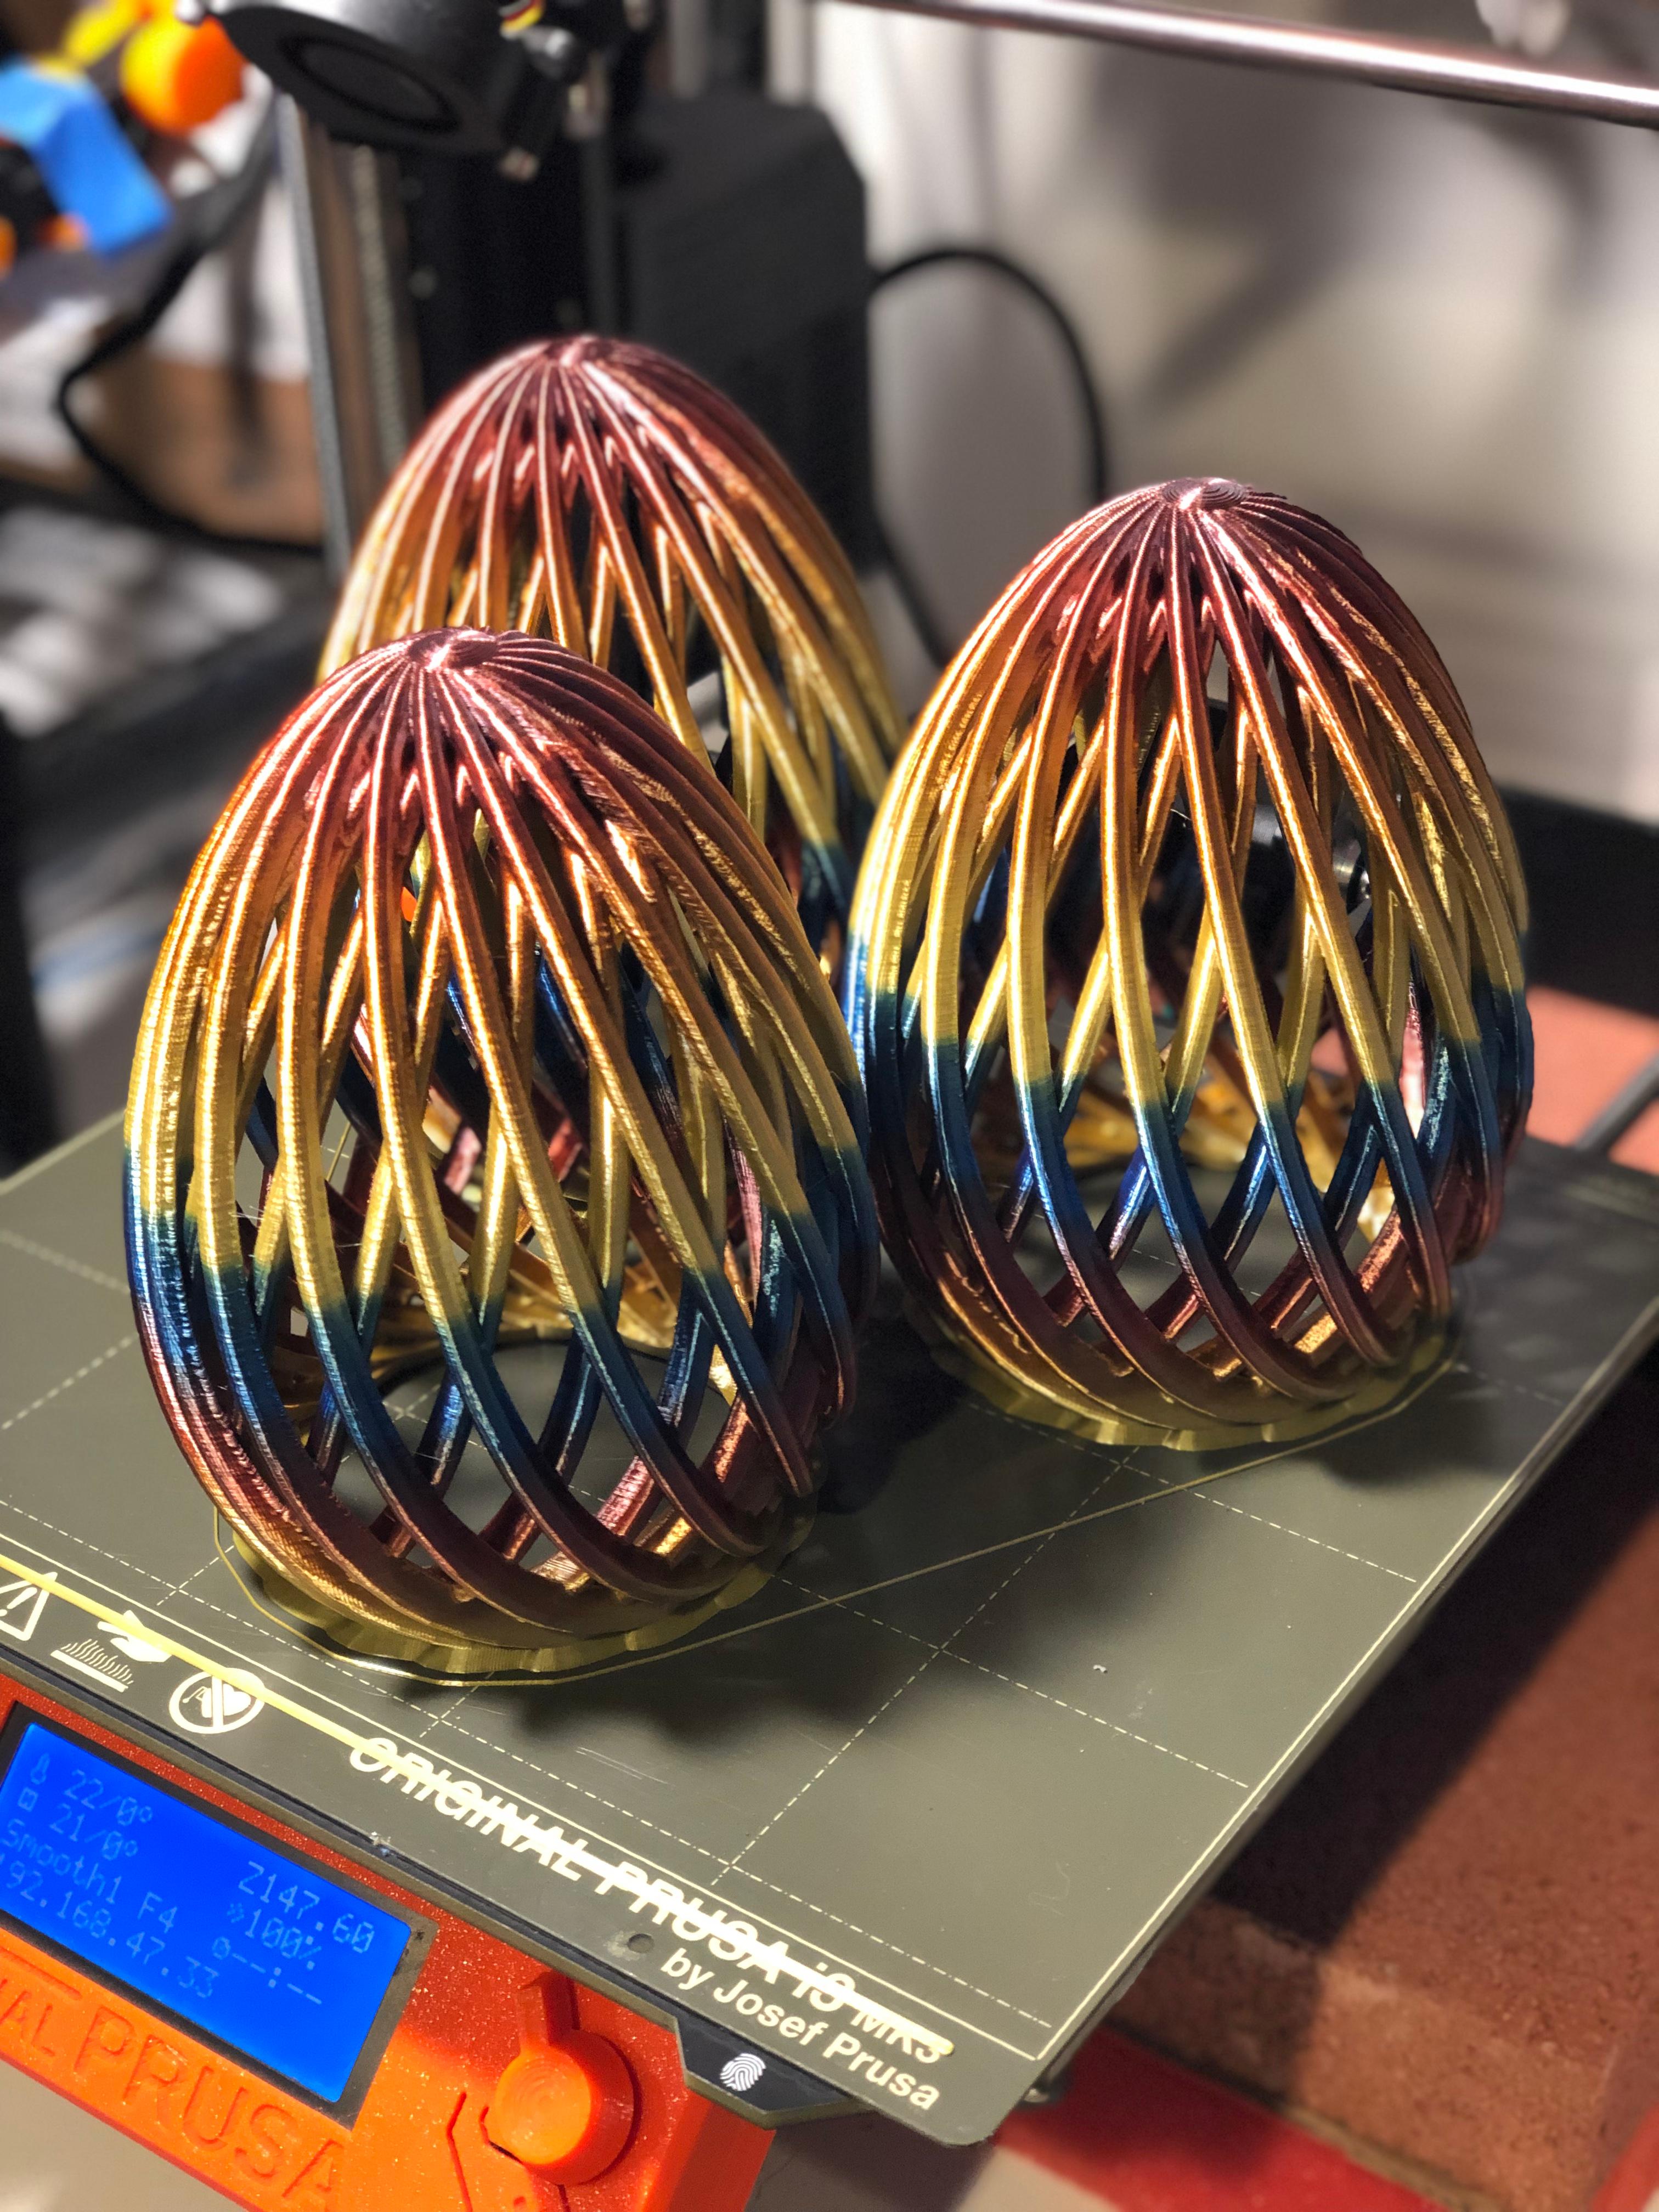 Spiral (Easter) Egg Box - Easy Print, No Supports - Three eggs printed for Easter surprise in Rainbow Silk filament on MK3S, 0.4mm nozzle, 0.15mm layers, 3perimeters and a small brim...61hours later...

Thanks for a great model. - 3d model